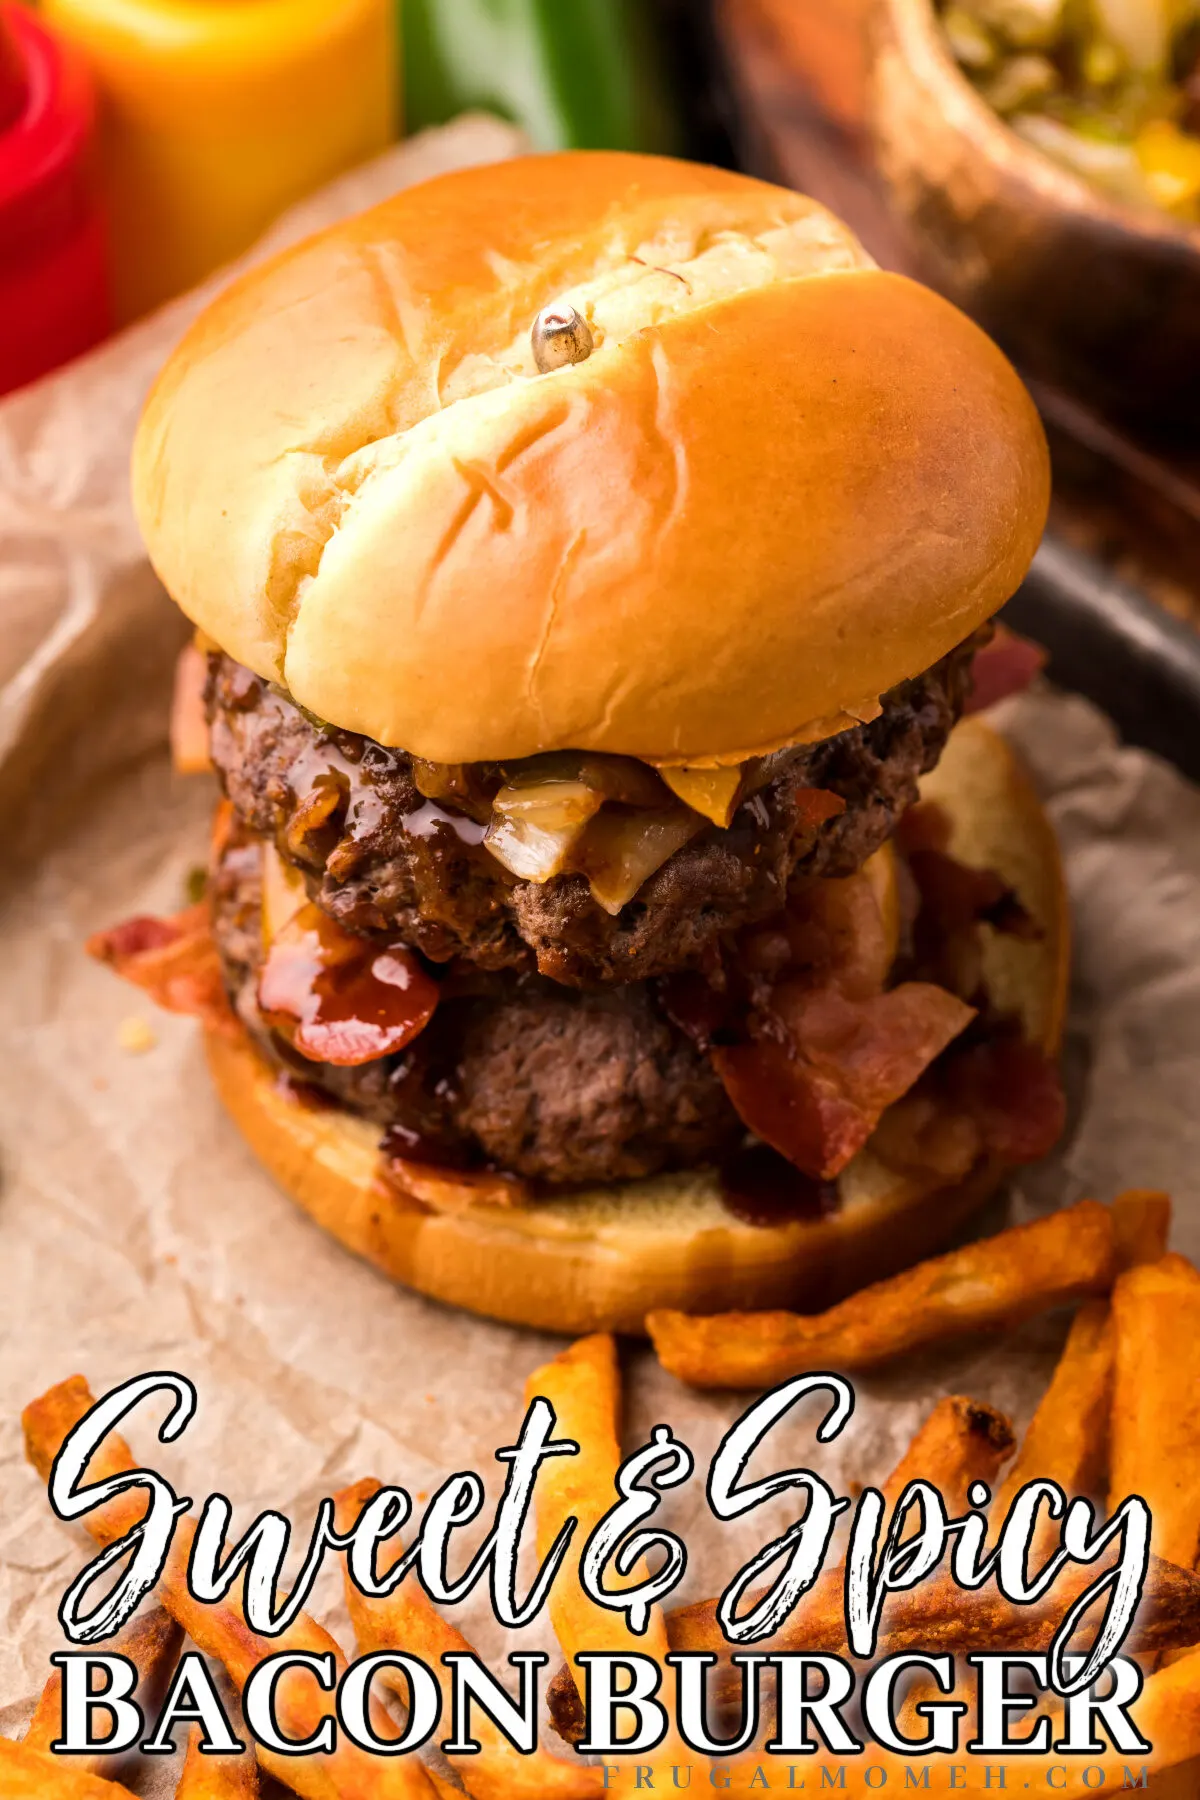 This sweet n spicy bacon burger recipe is easy to make and features caramelized onions and peppers with an amazing sweet n spicy bbq sauce.